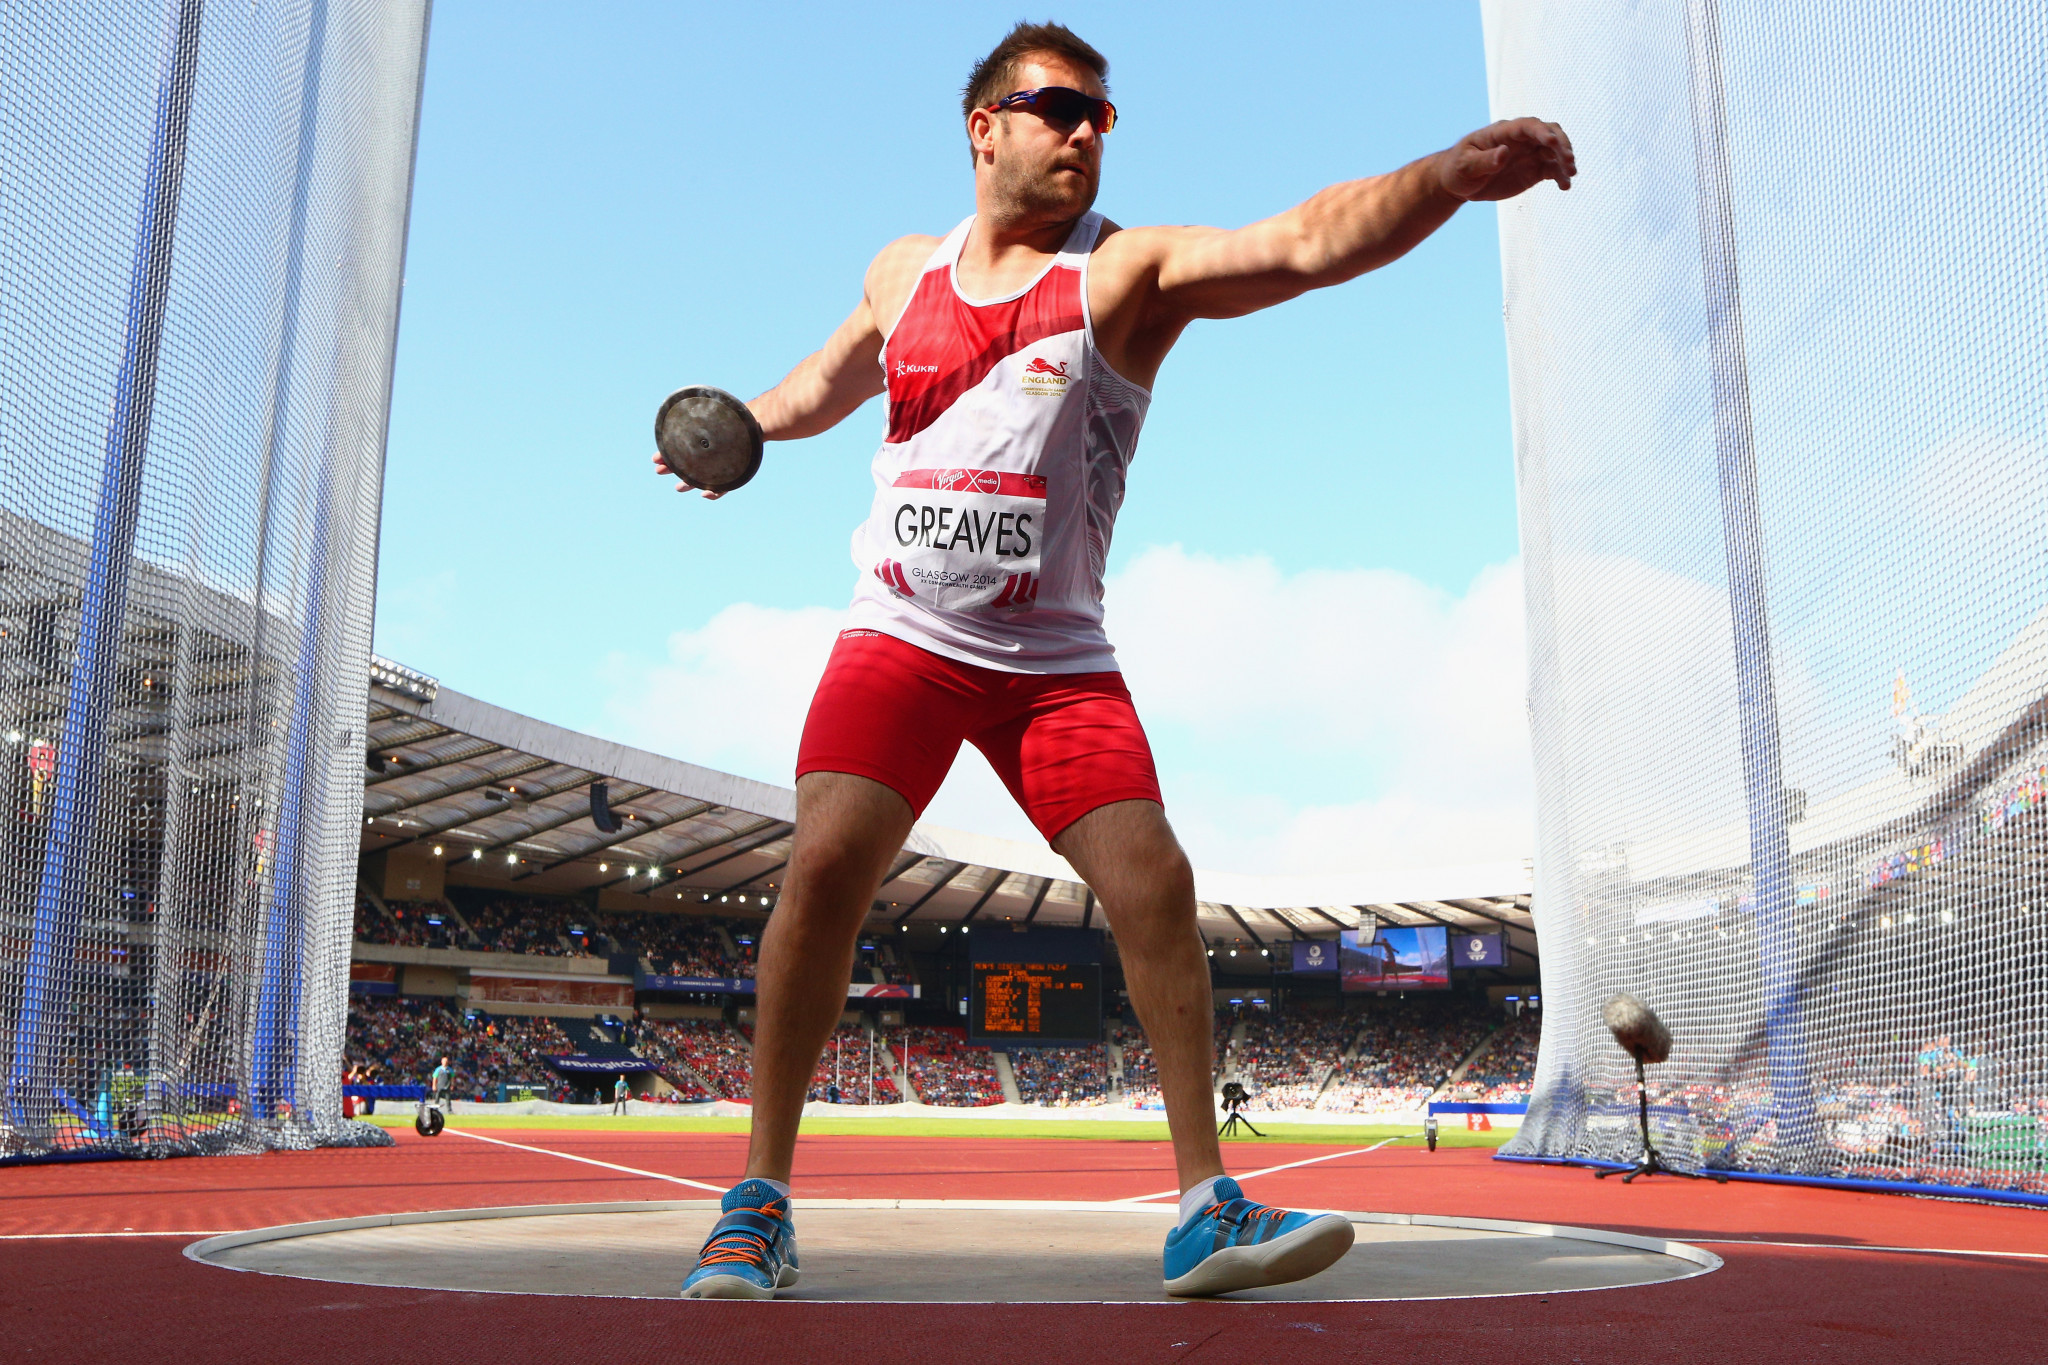 Daniel Greaves won a gold medal at the Glasgow 2014 Commonwealth Games ©Getty Images